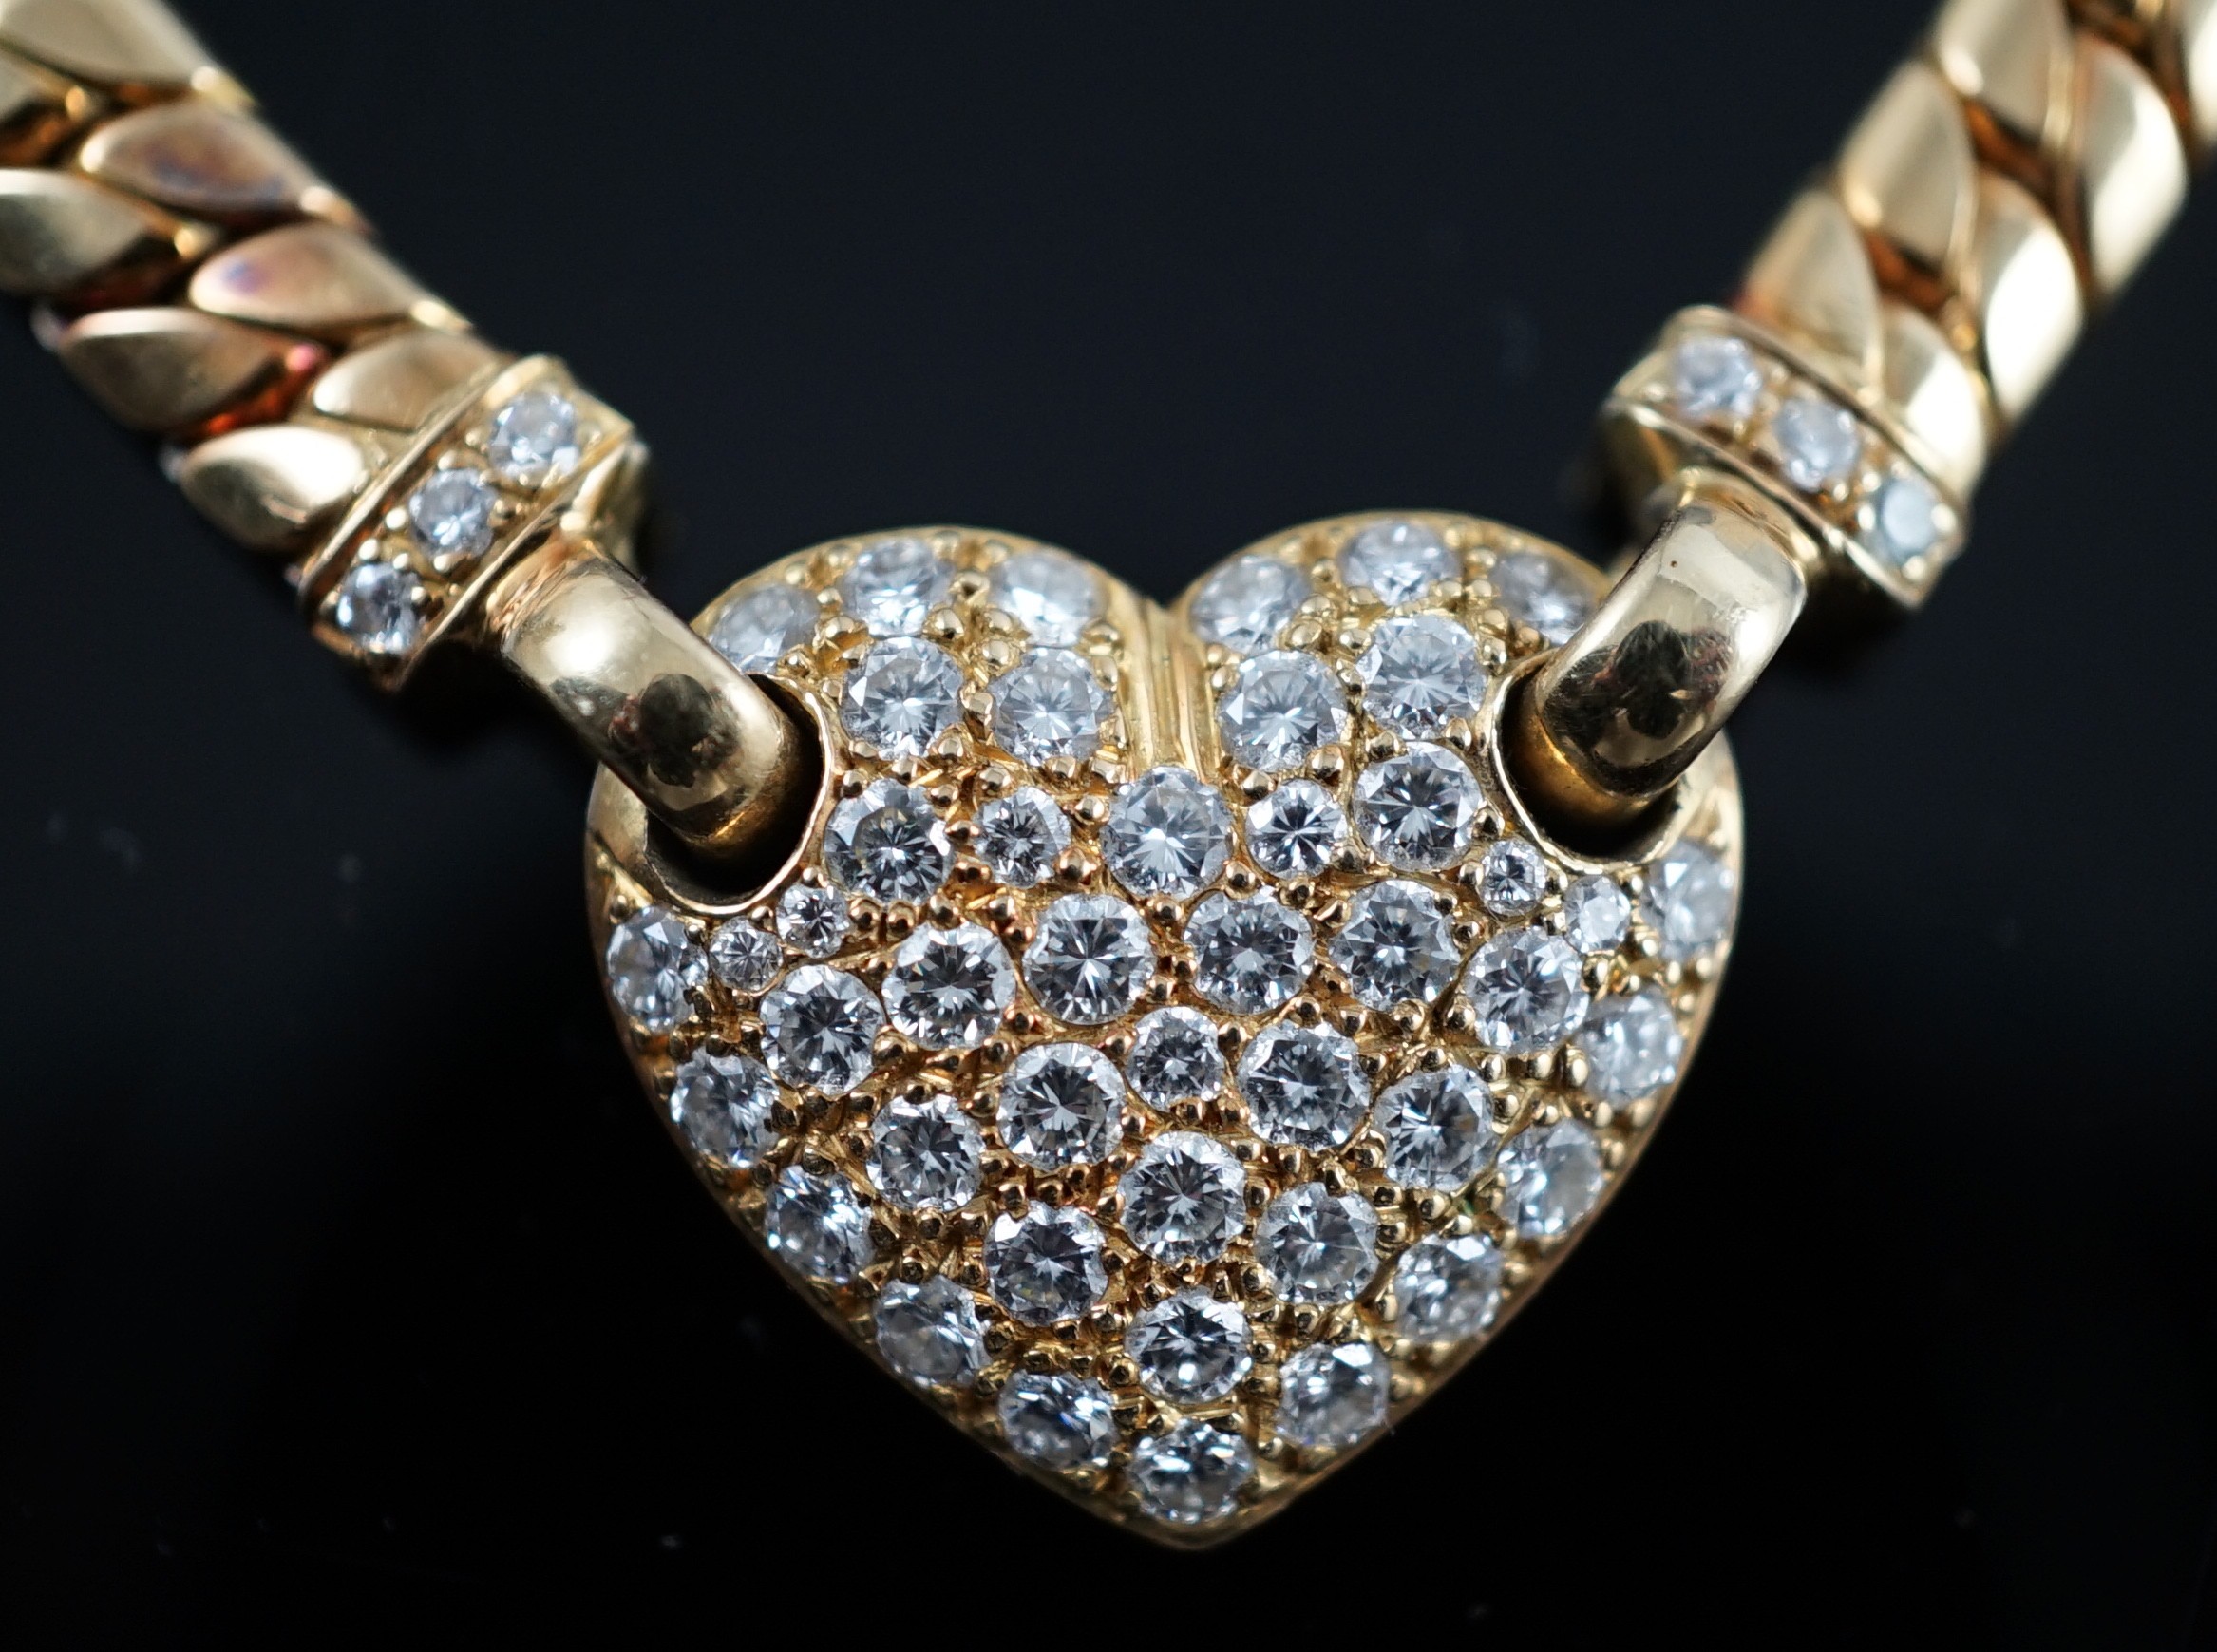 A modern 18ct gold and pave set diamond heart shaped pendant necklace